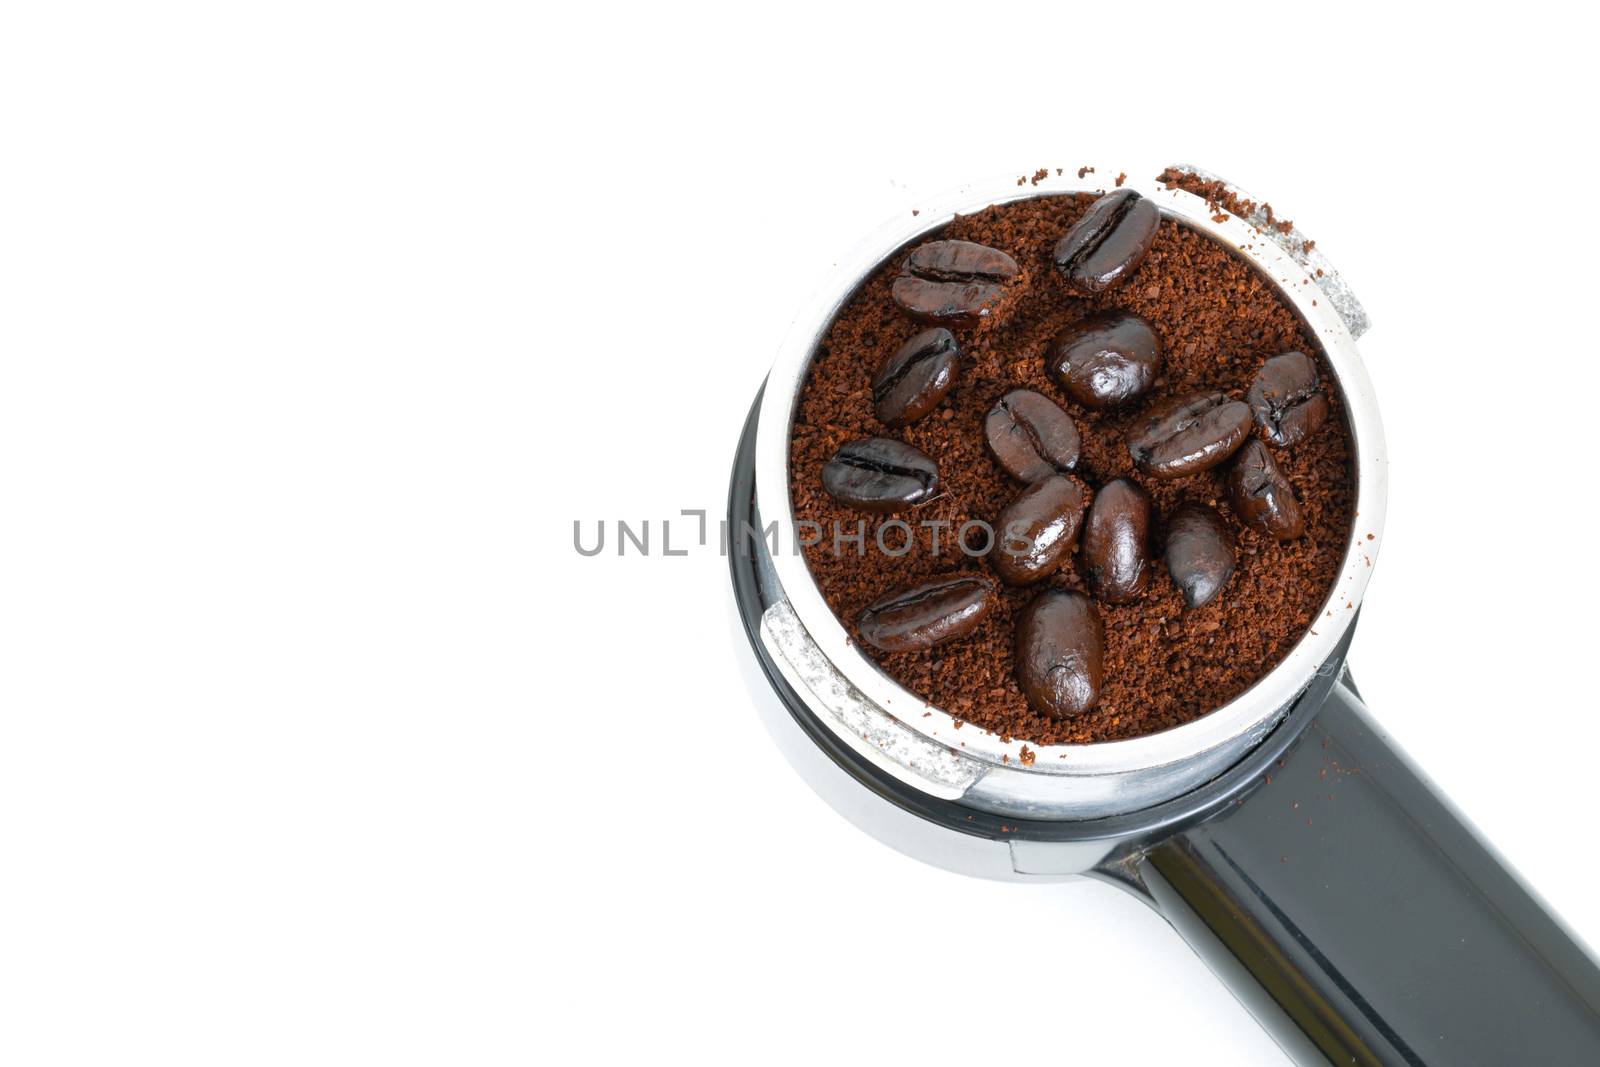 Roasted coffee in the maker on a white background by sompongtom